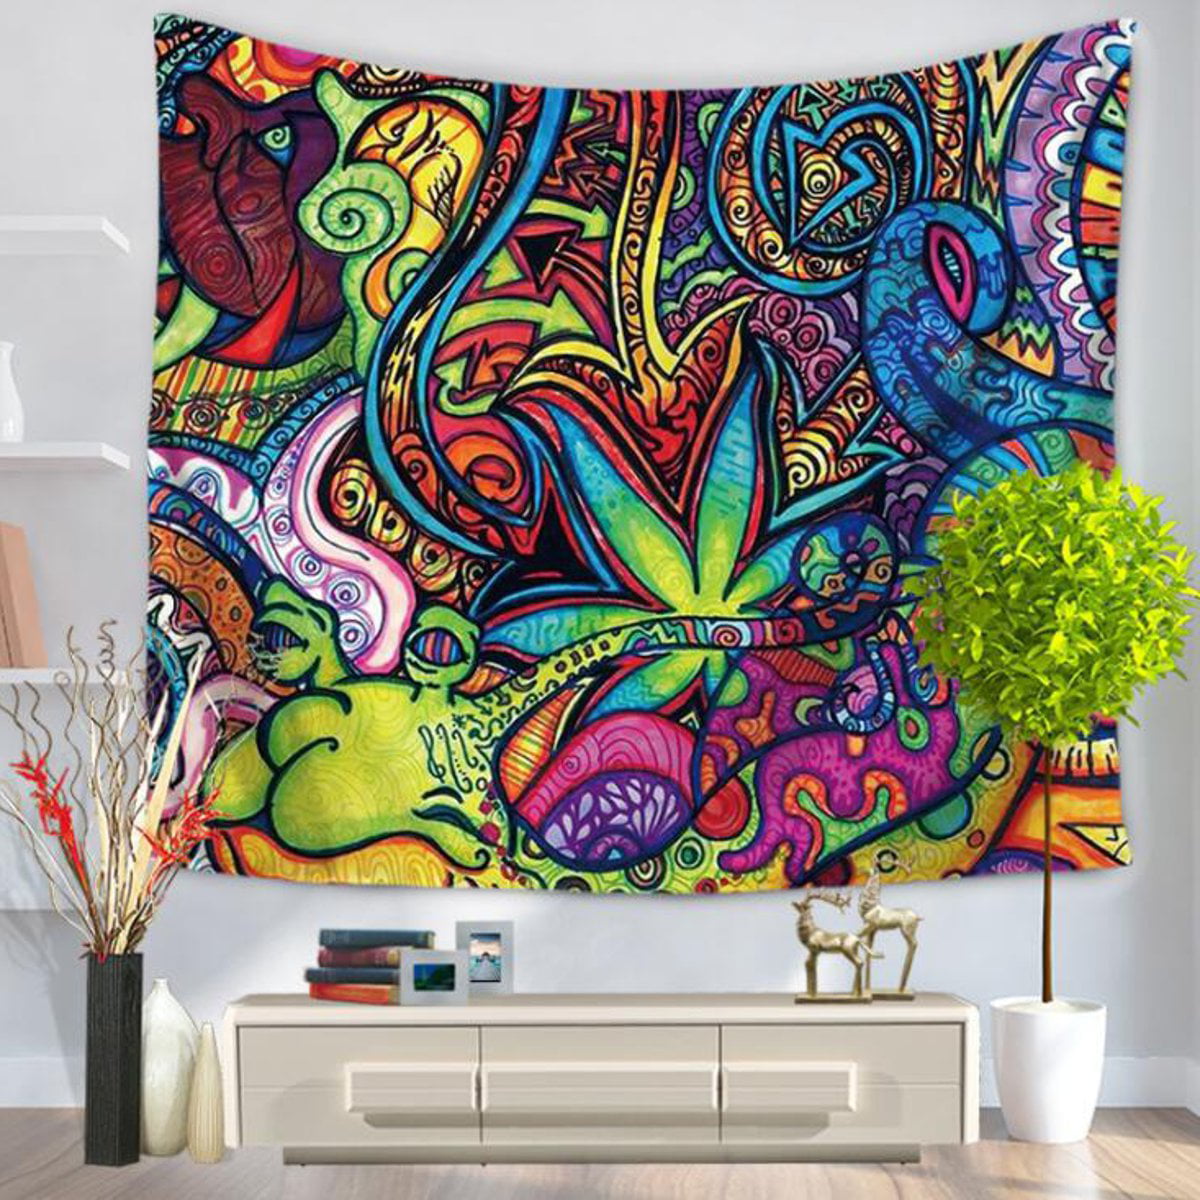 Details about   Art Hippie Psychedelic Mandala Bedspread Art Blanket Decor Tapestry Wall Hanging 